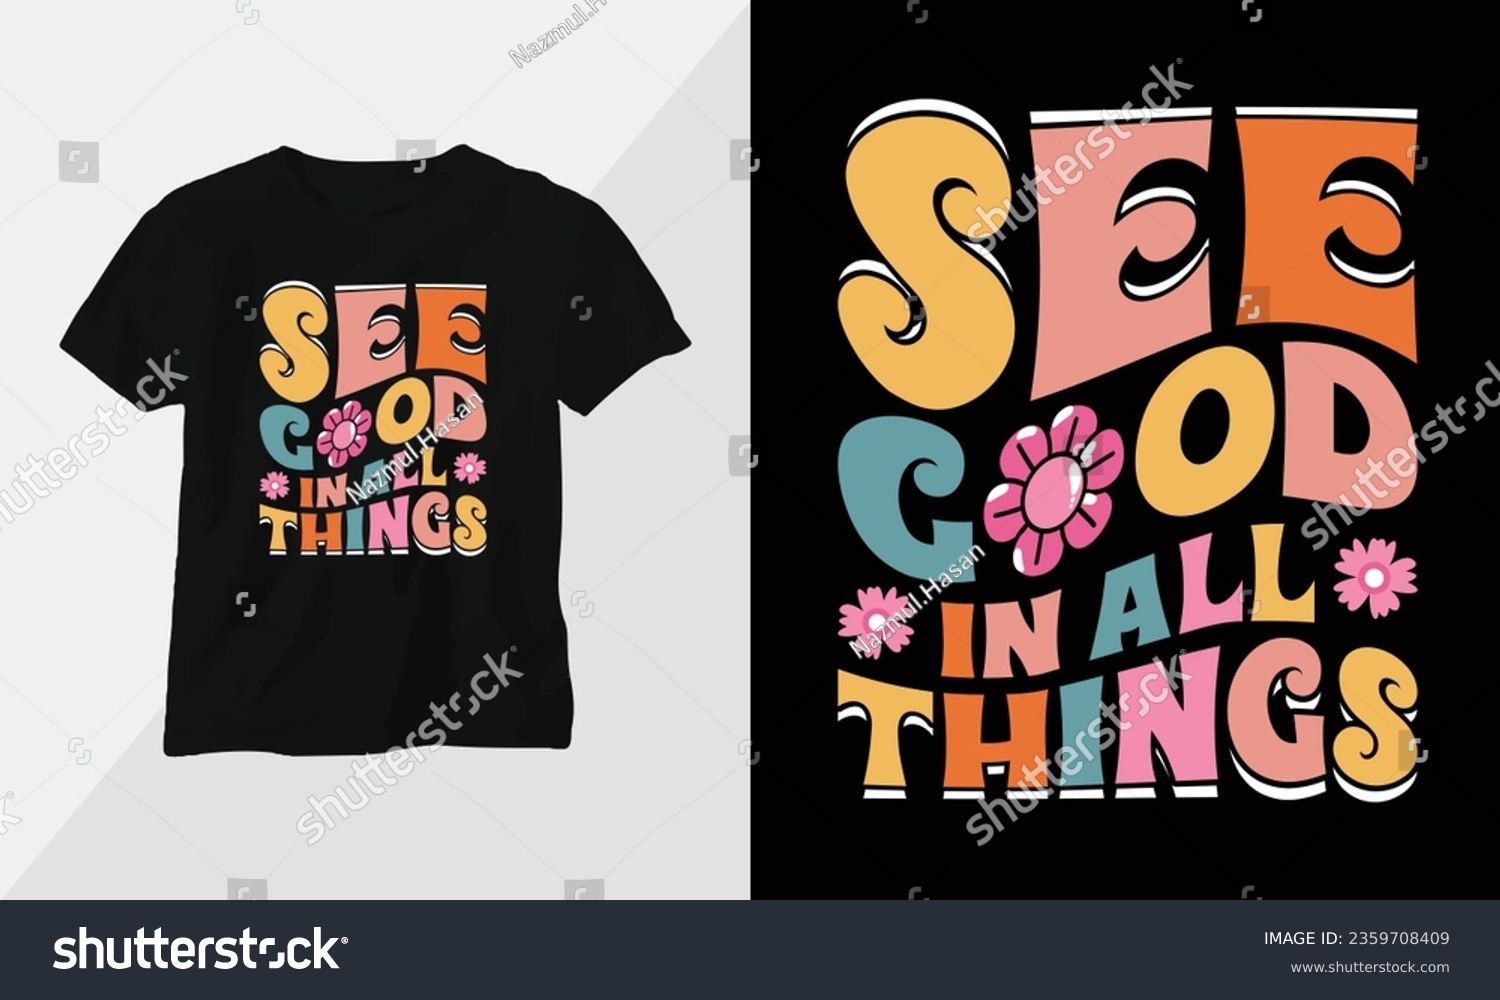 SVG of See good in all things - Retro Groovy Inspirational T-shirt Design with retro style svg